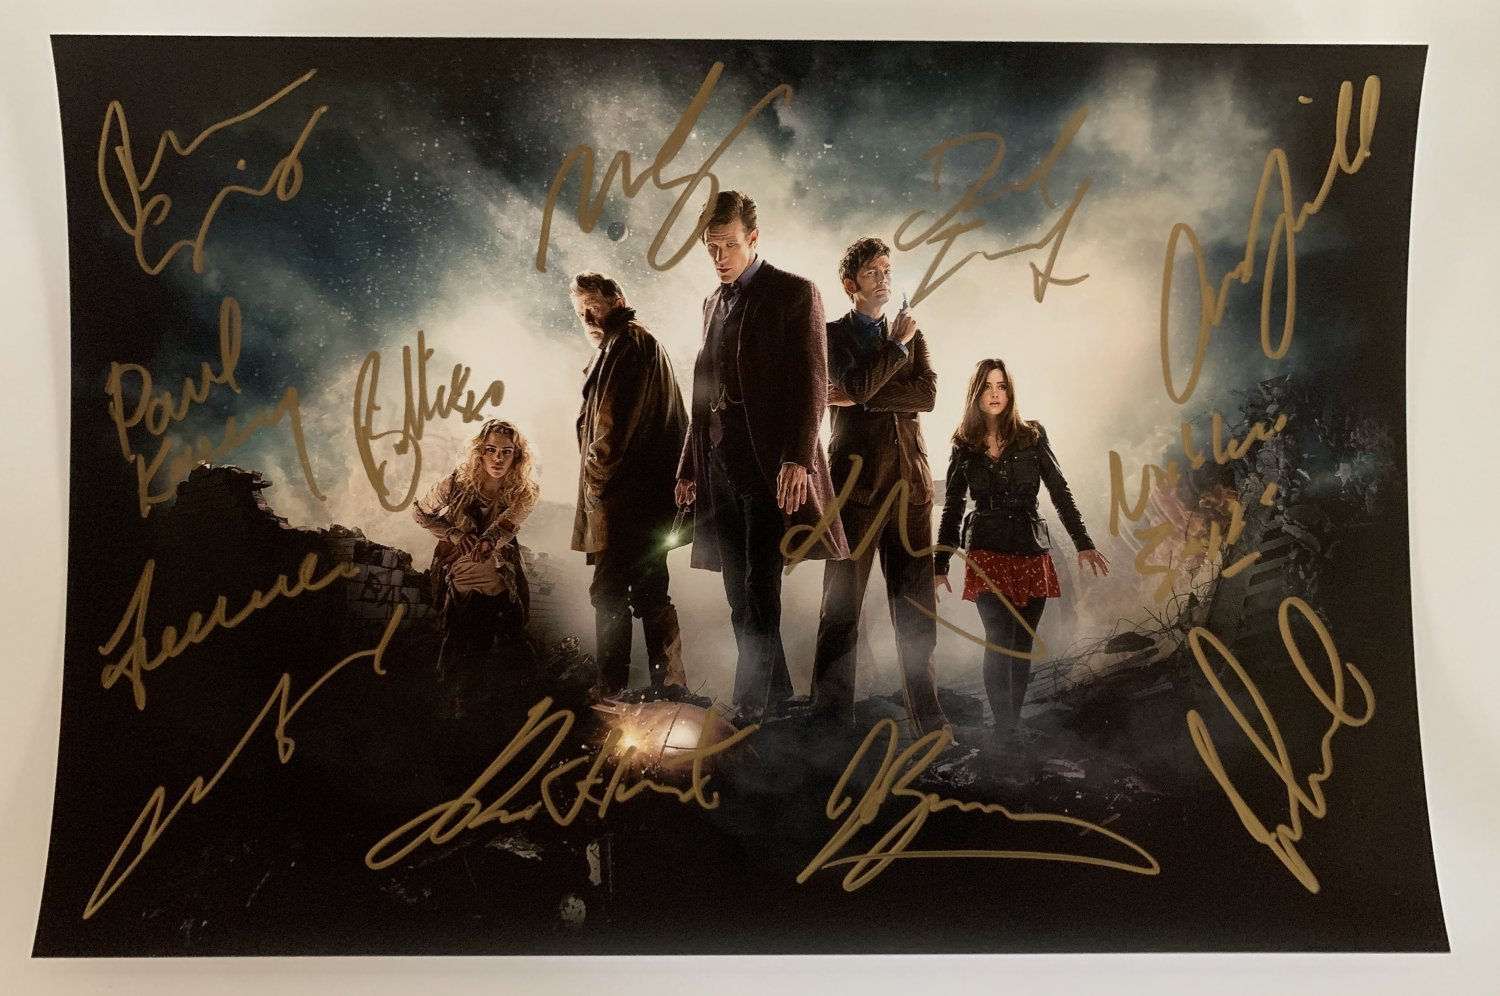 Doctor Who cast signed autographed 8x12 photo photograph David Tennant Matt Smith